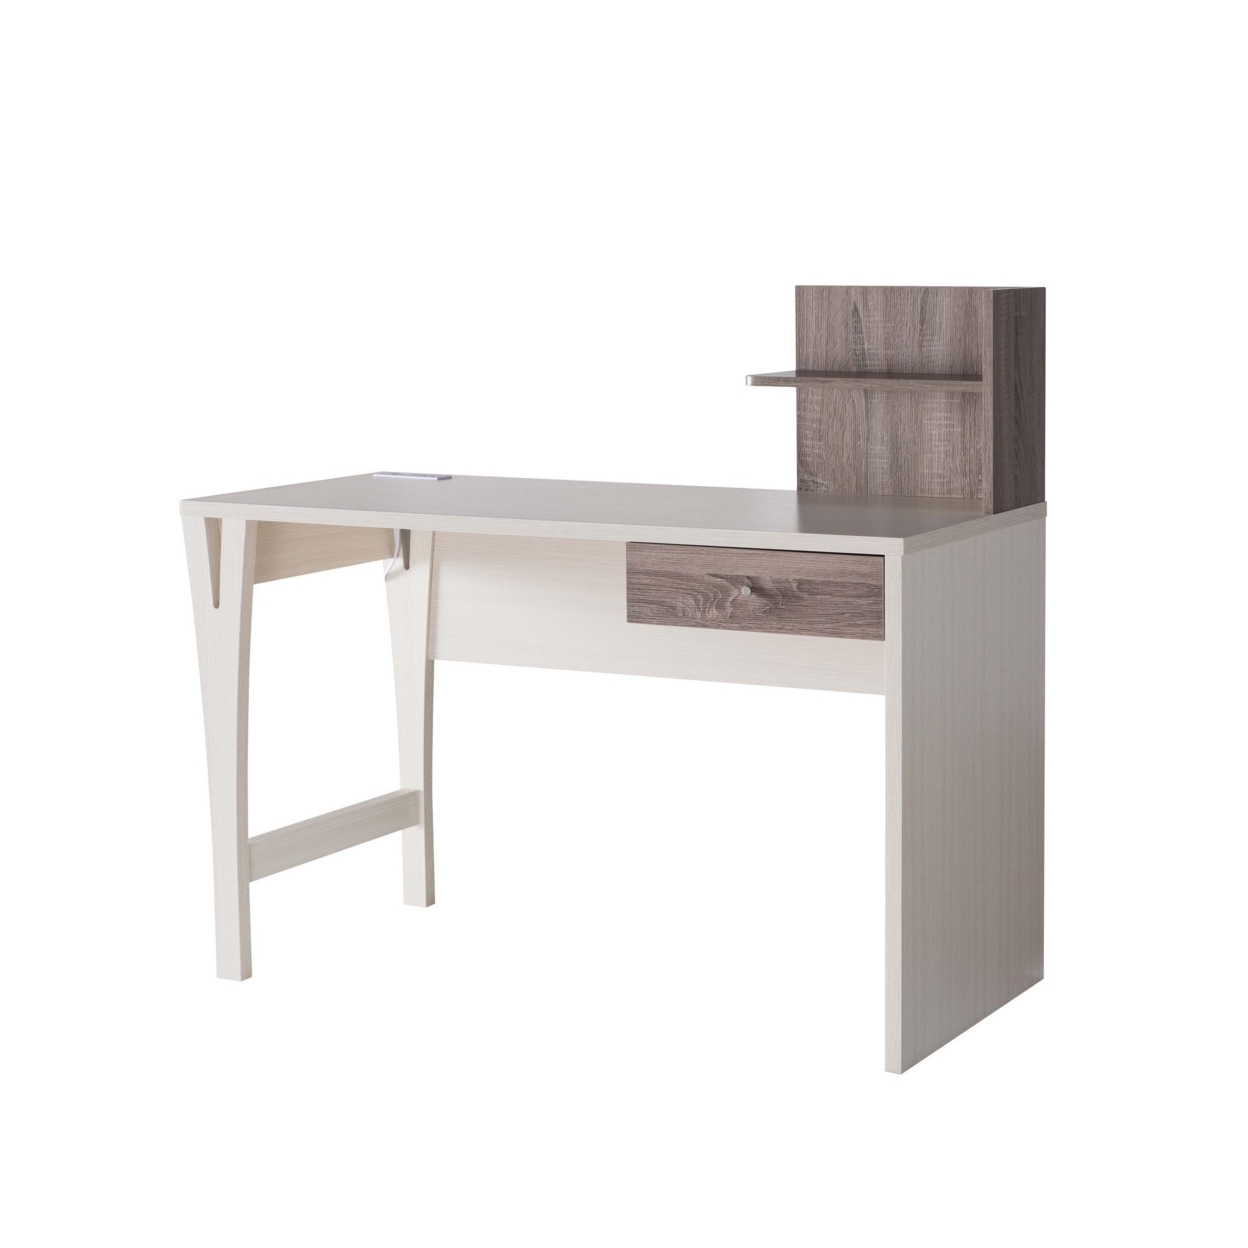 Wooden Desk With 1 Drawer And Side Shelf, Cream And Brown- Saltoro Sherpi